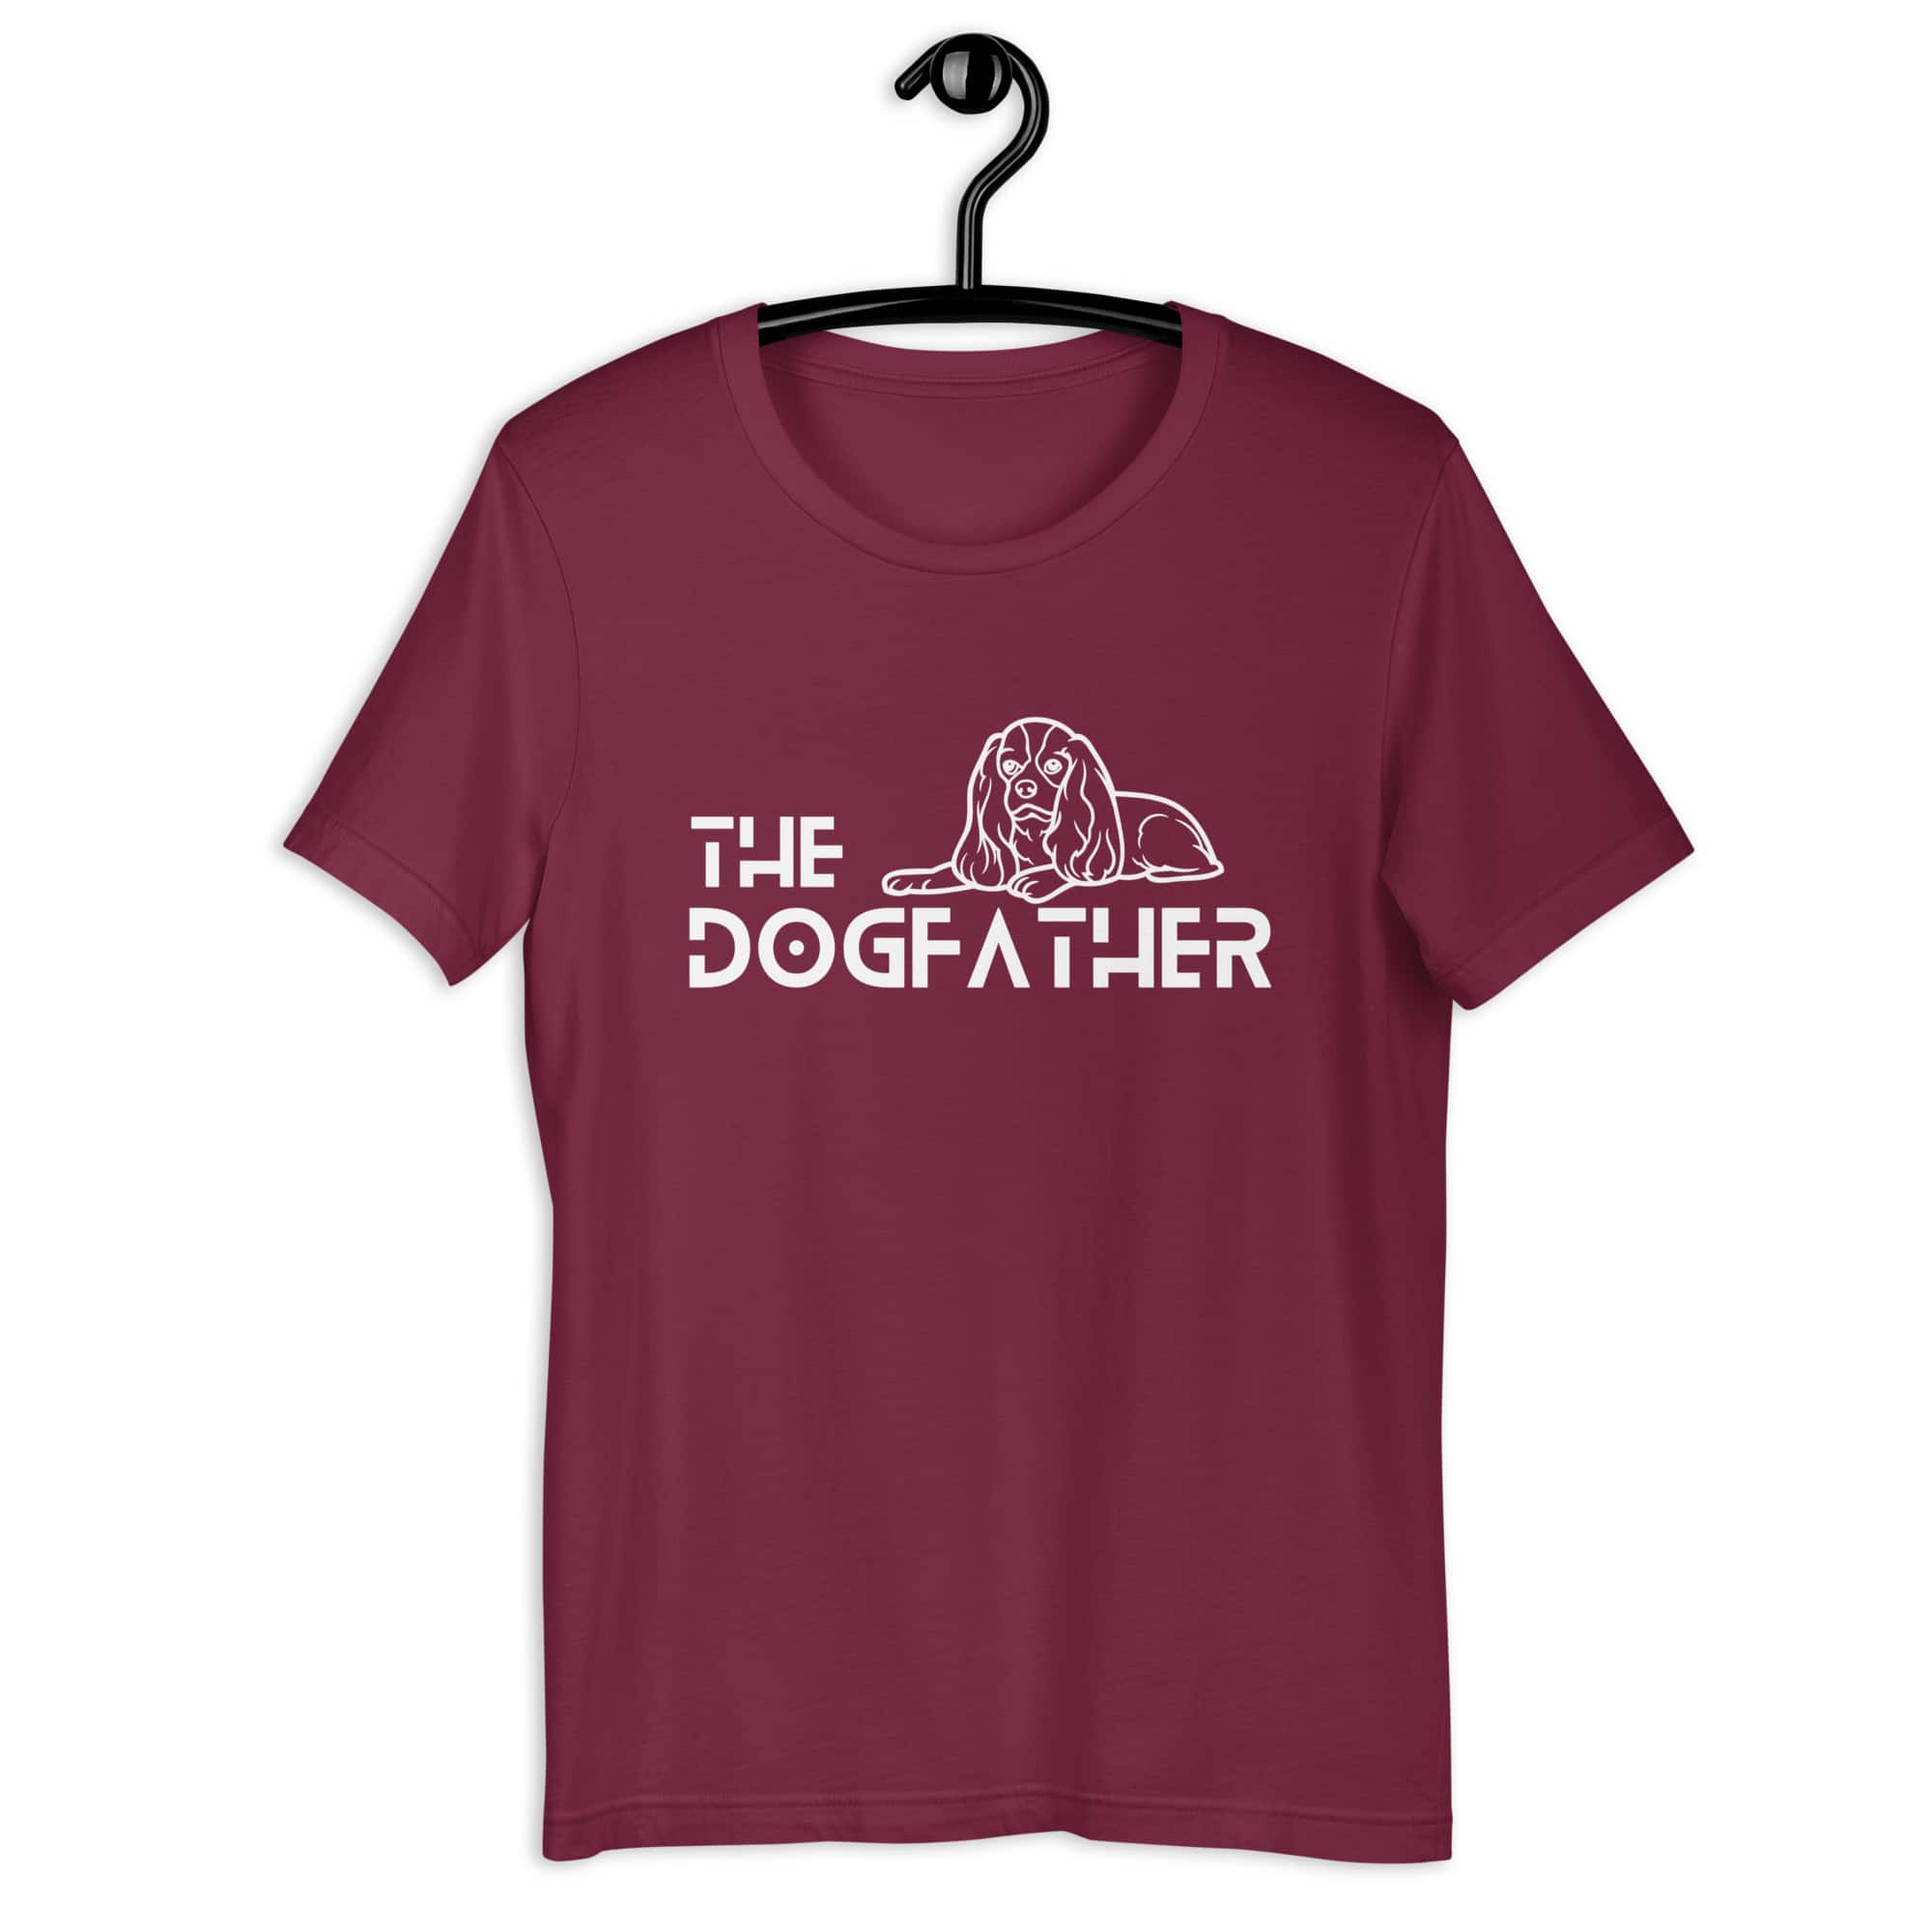 The Dogfather Hounds Unisex T-Shirt. Maroon